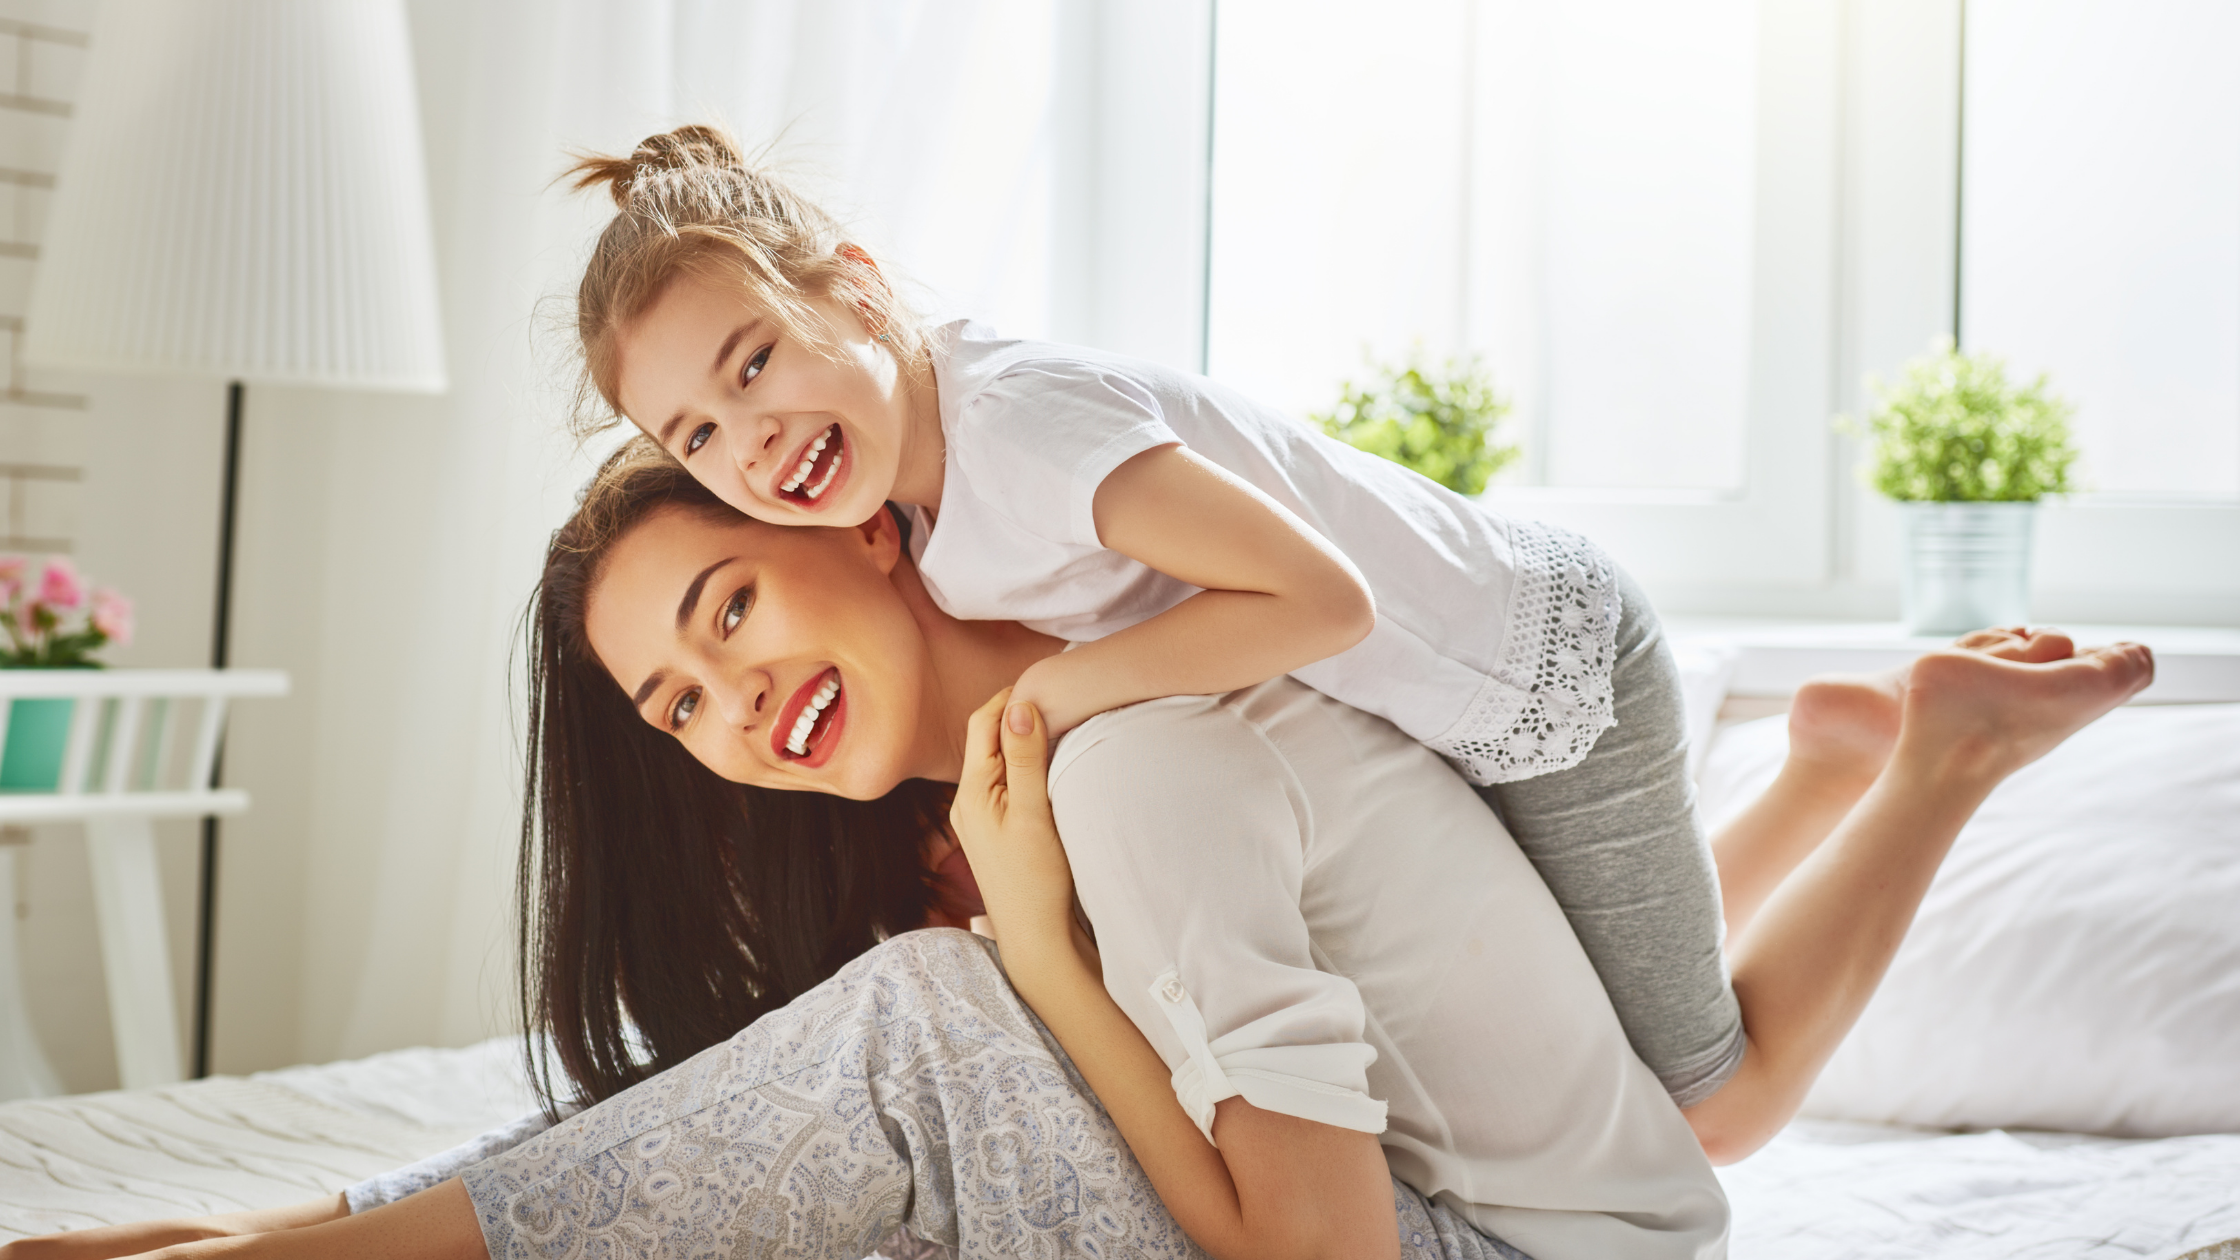 6 biblical truths for single moms